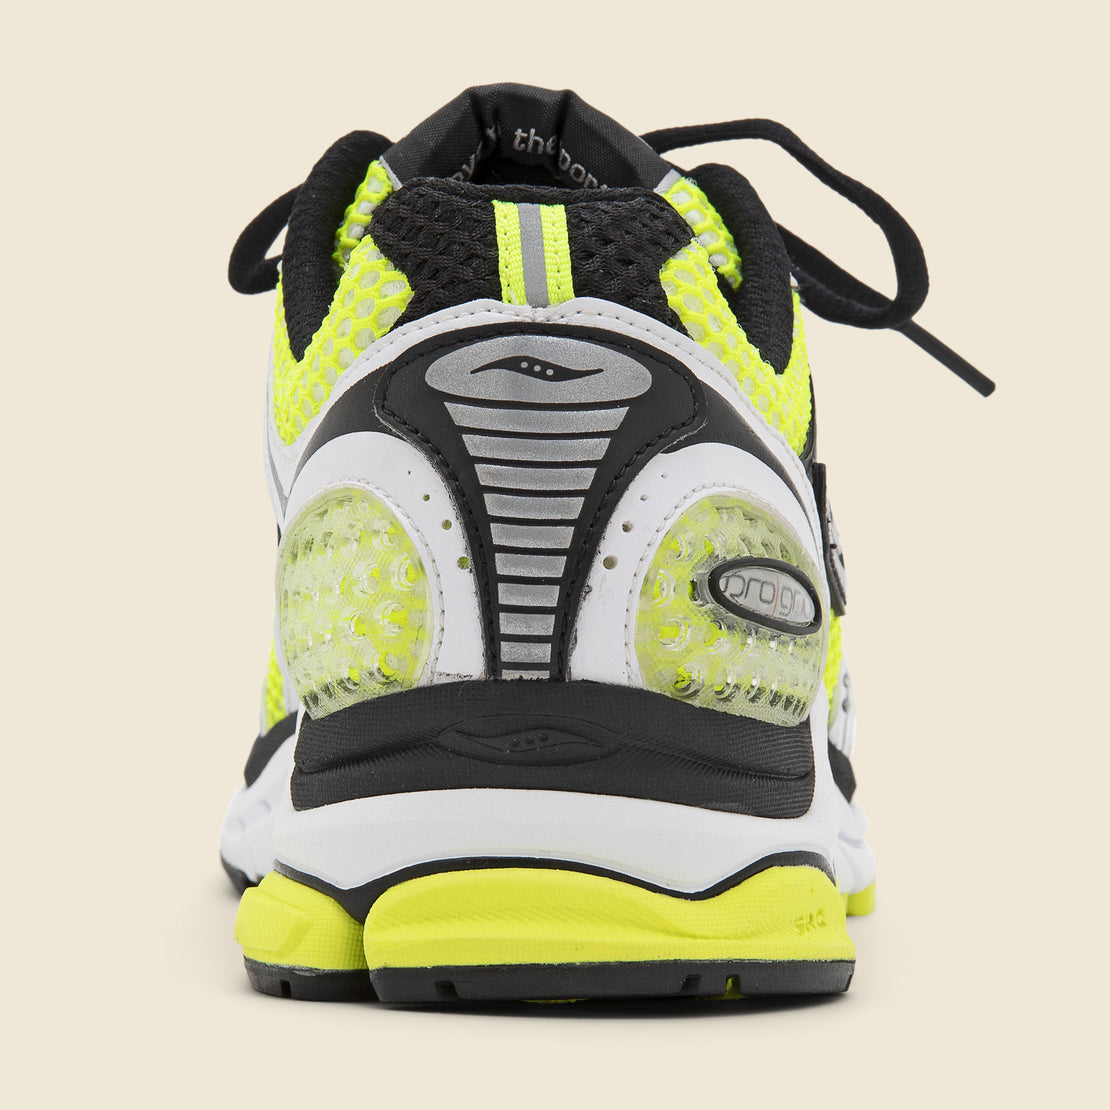 Progrid Triumph 4 OG Sneaker - Neon - Saucony - STAG Provisions - Shoes - Athletic